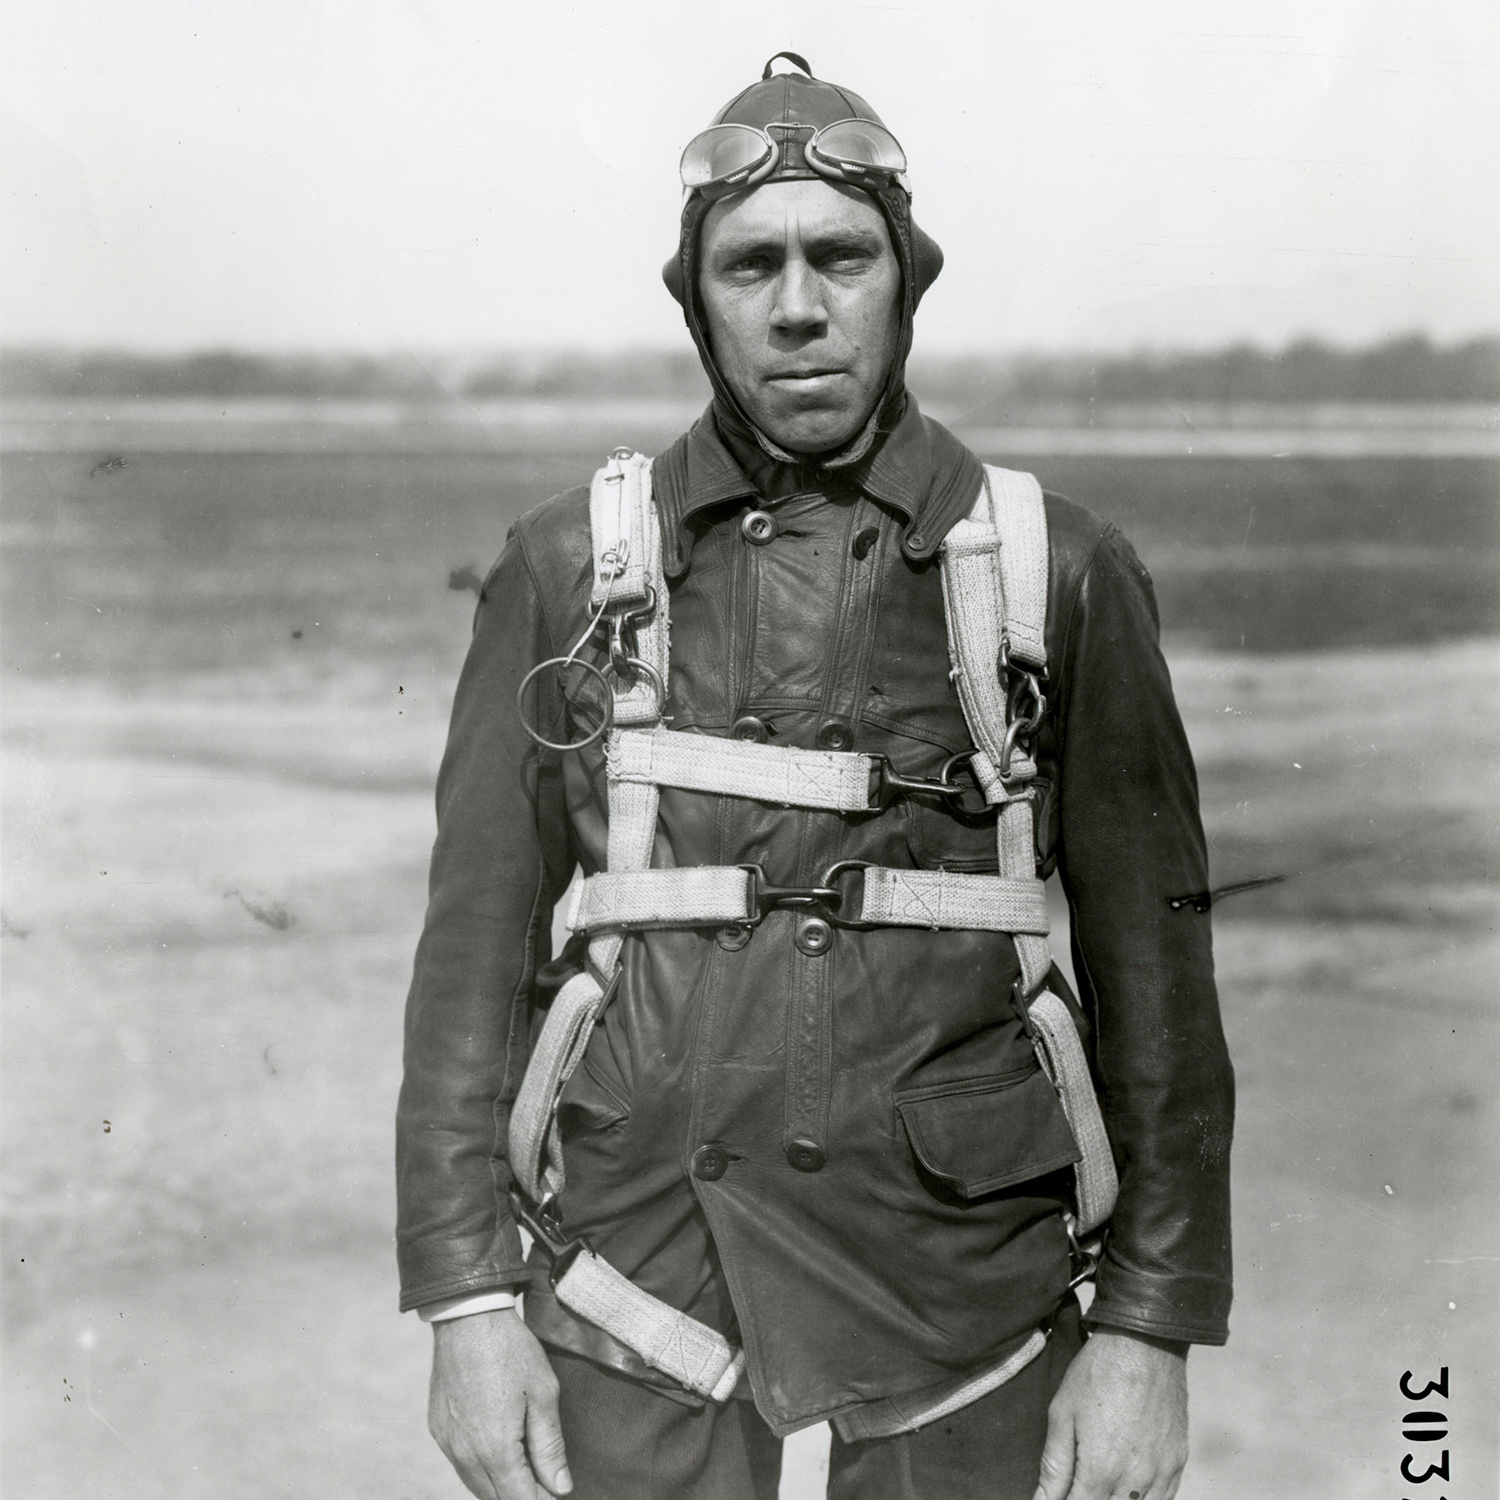 Floyd Smith poses for the camera wearing the Type A parachute.